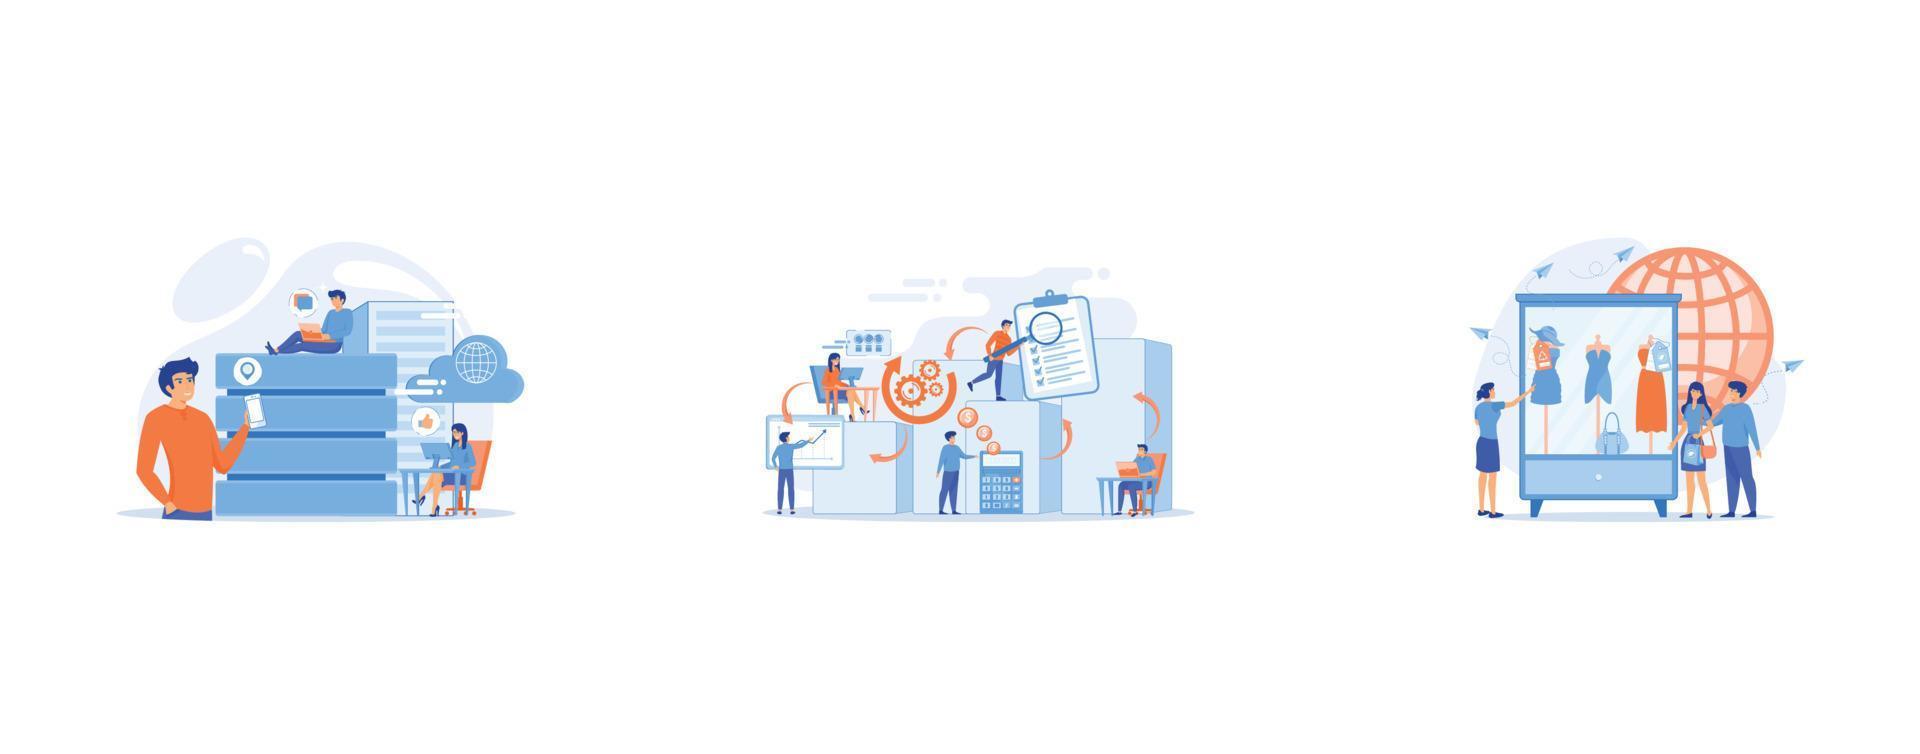 Internet users with proxy server using big data, Workforce organization and management, Recyclable and eco textile, set flat vector modern illustration